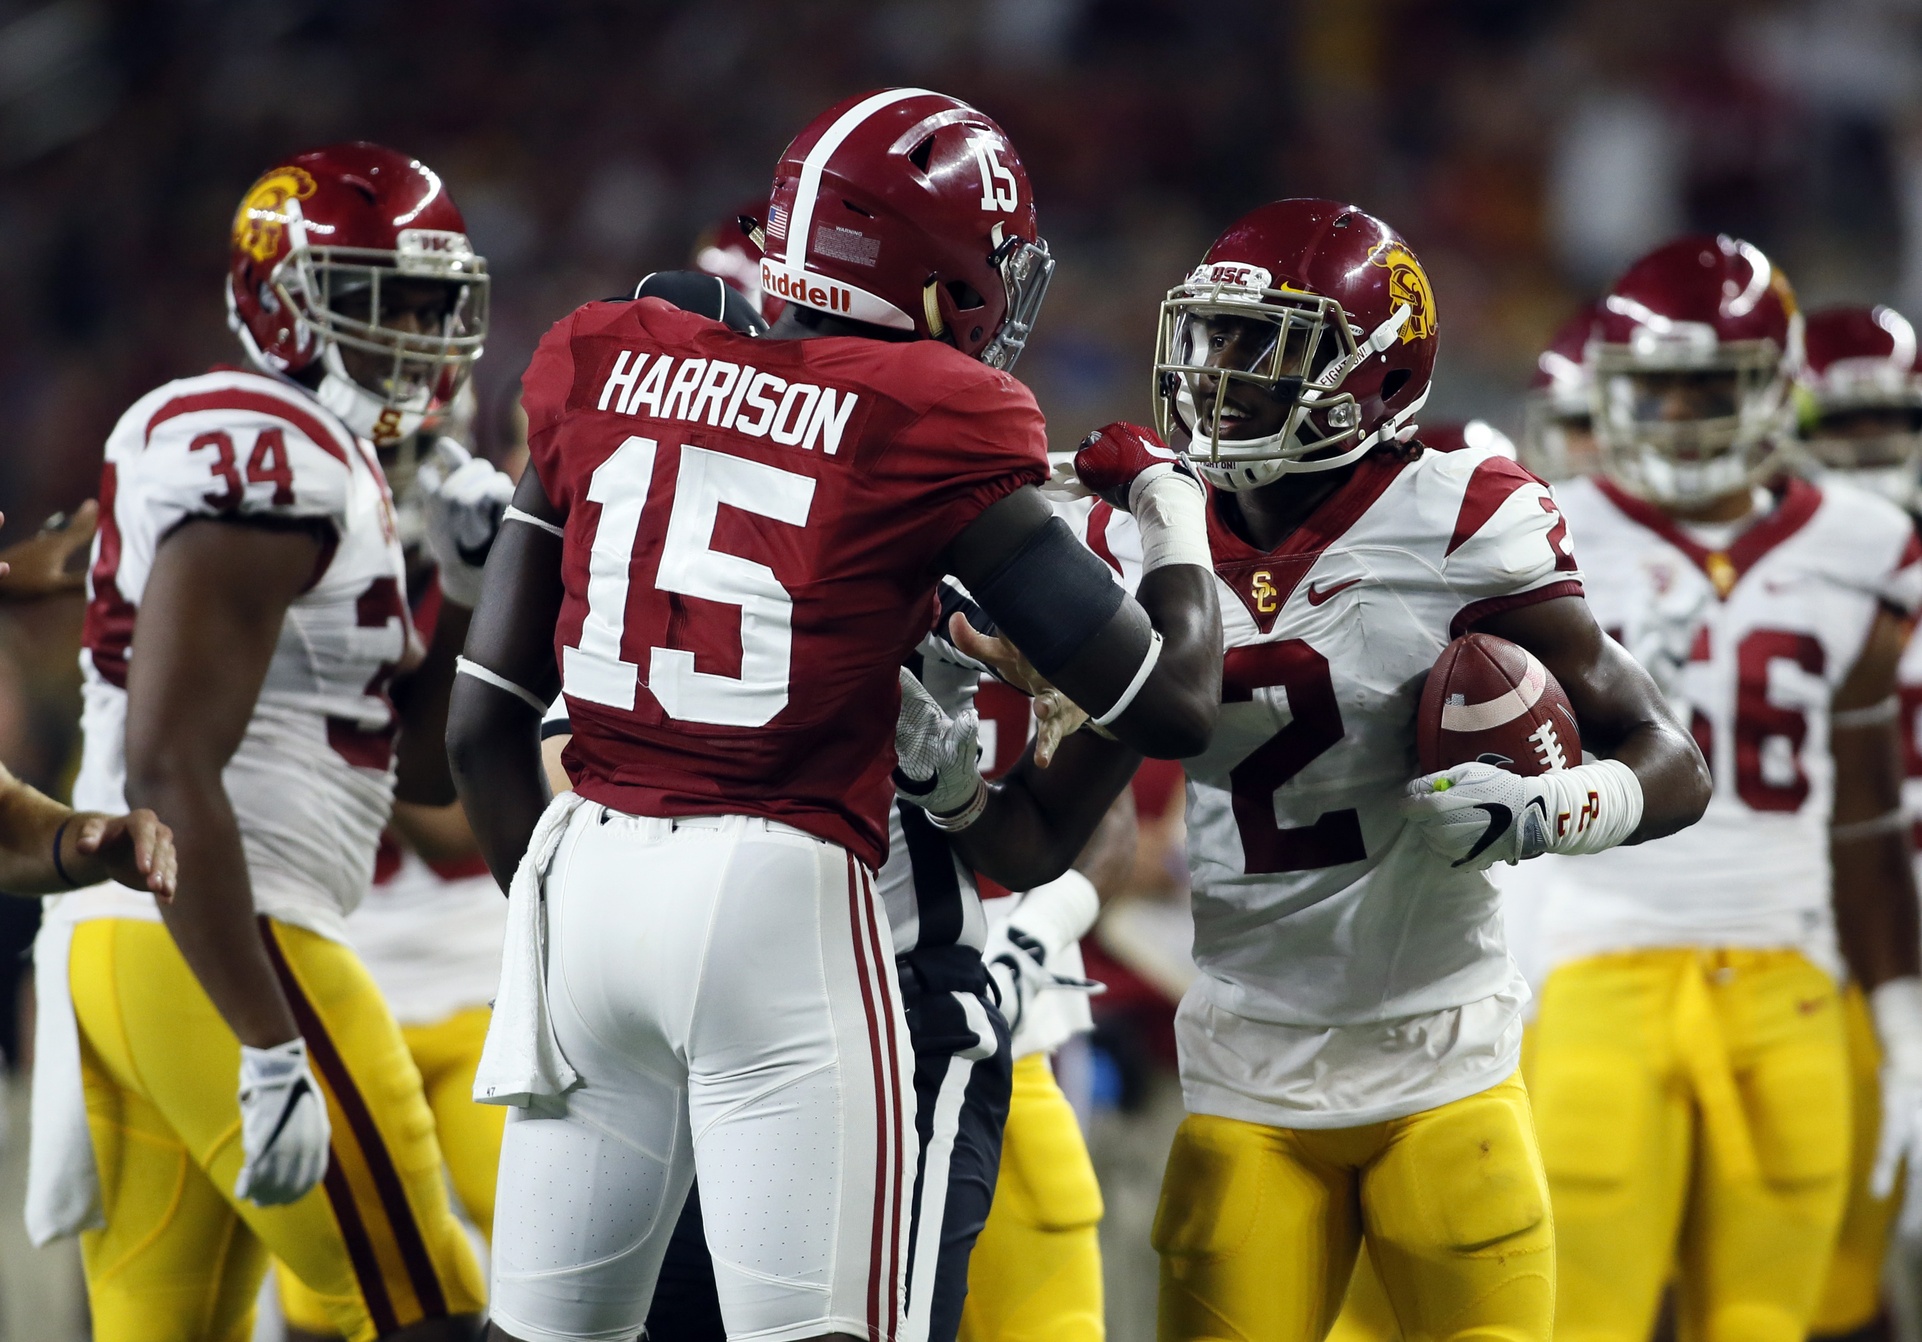 Sep 3, 2016; Arlington, TX, USA; Alabama Crimson Tide defensive back Ronnie Harrison (15) scuffles with USC Trojans defensive back Adoree' Jackson (2) during the first half at AT&T Stadium. Mandatory Credit: Tim Heitman-USA TODAY Sports